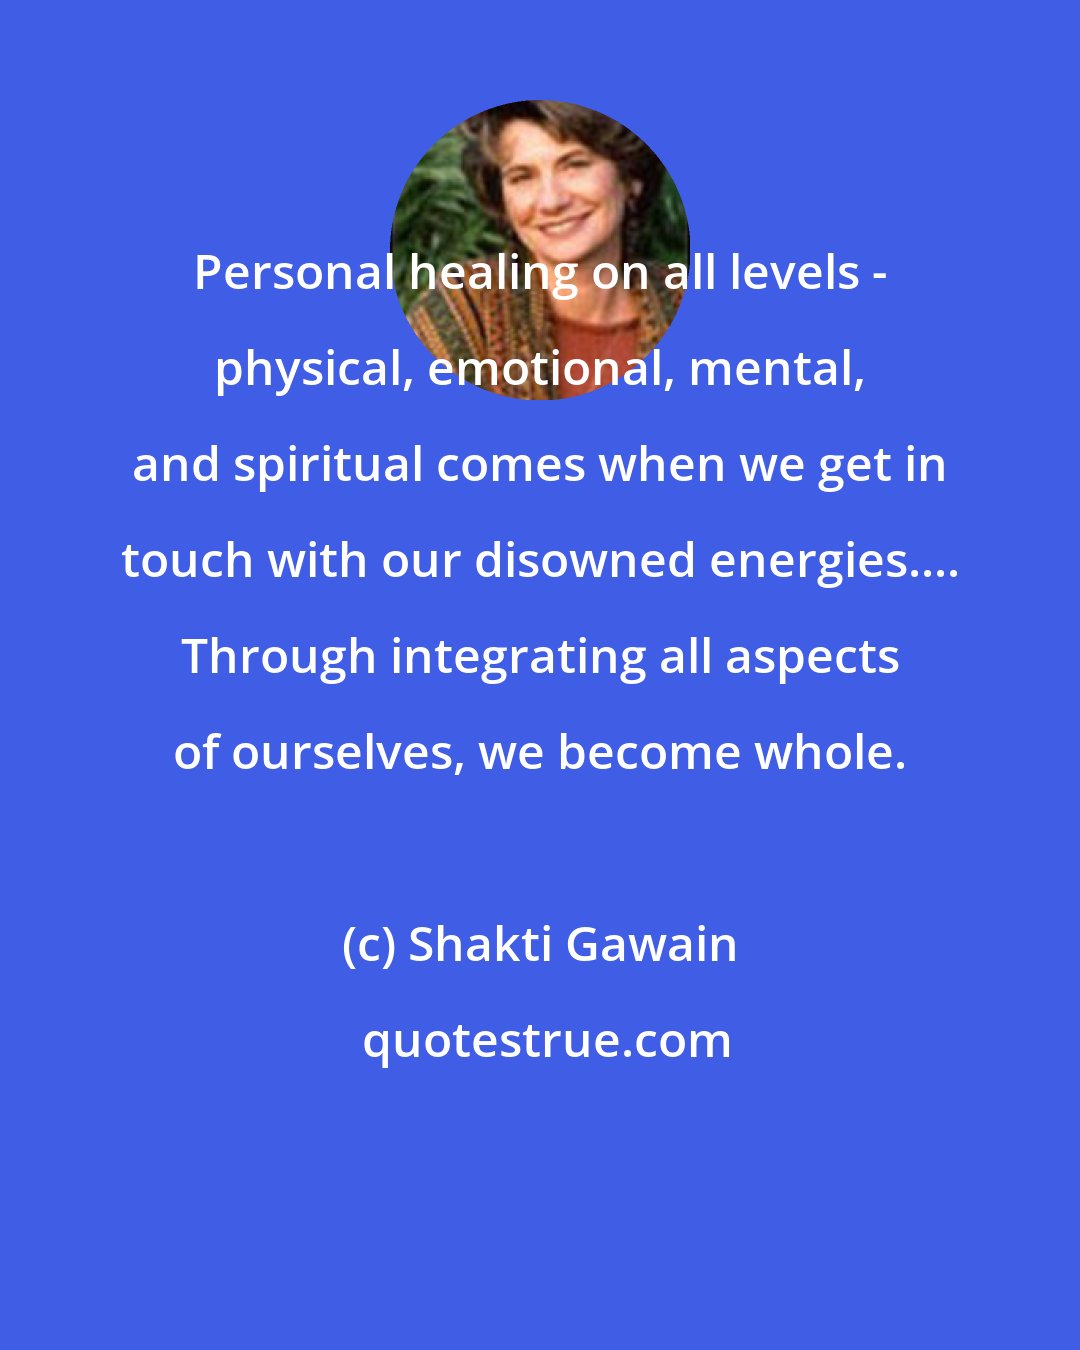 Shakti Gawain: Personal healing on all levels - physical, emotional, mental, and spiritual comes when we get in touch with our disowned energies.... Through integrating all aspects of ourselves, we become whole.